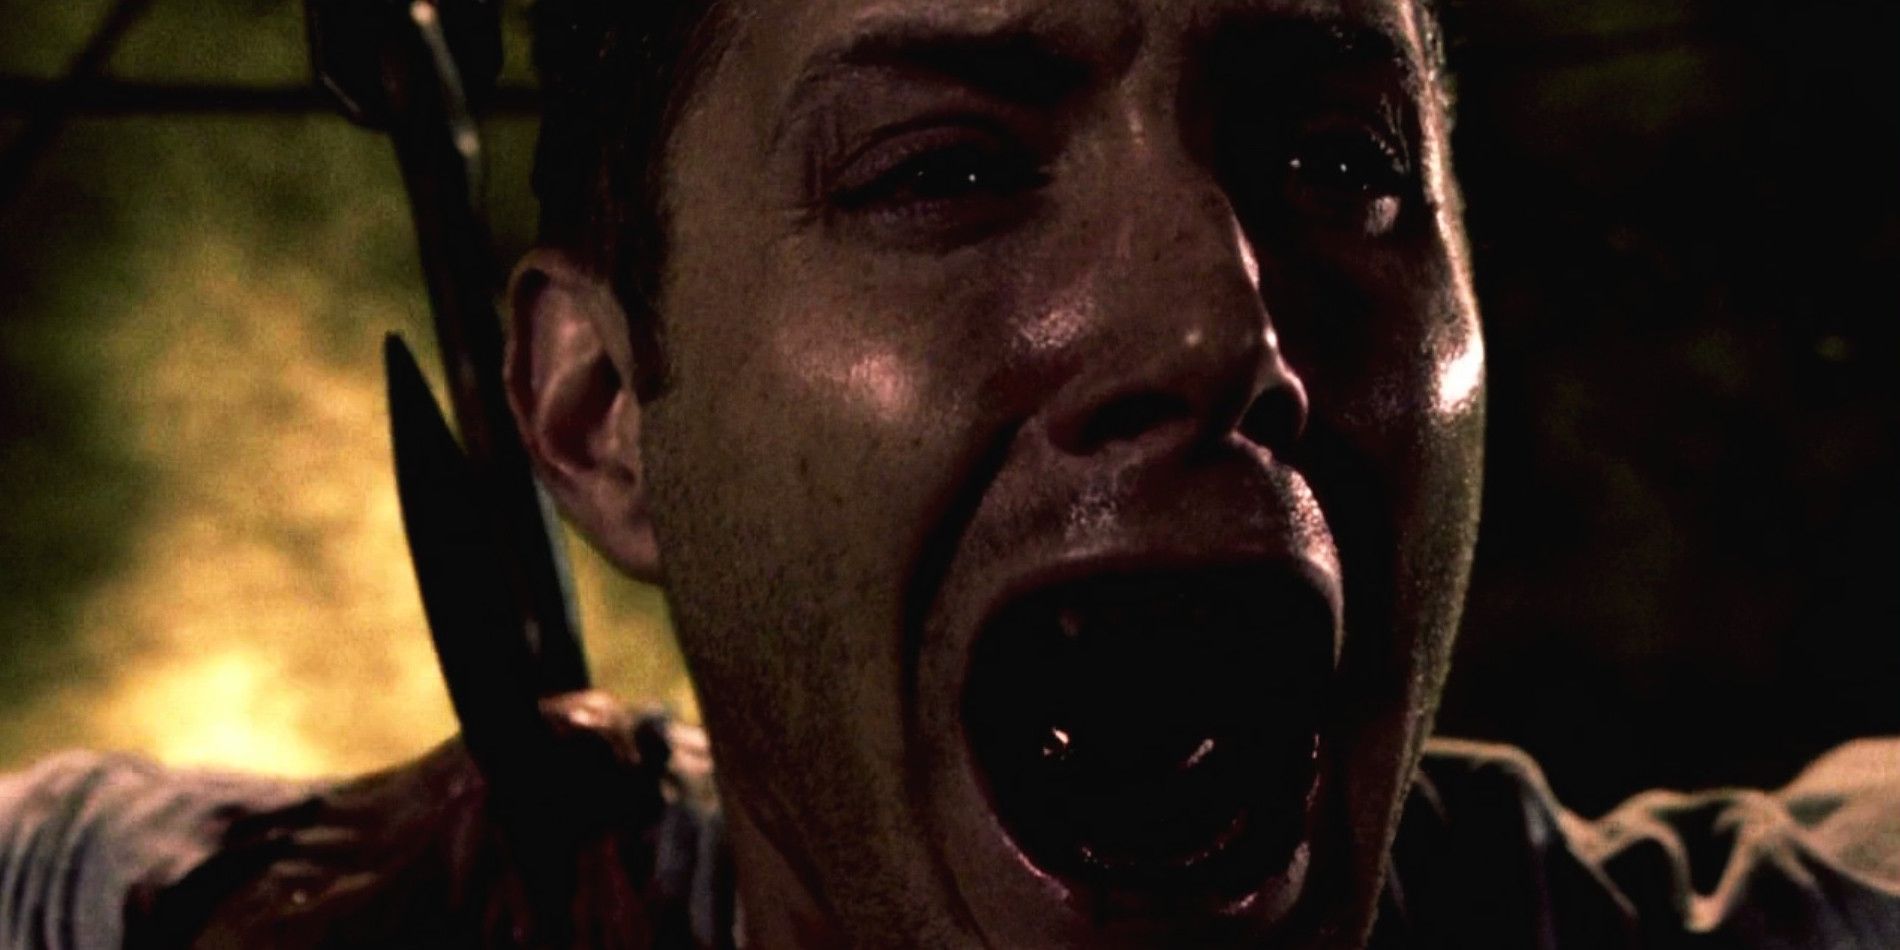 Dean screaming for Sam while in hell in Supernatural